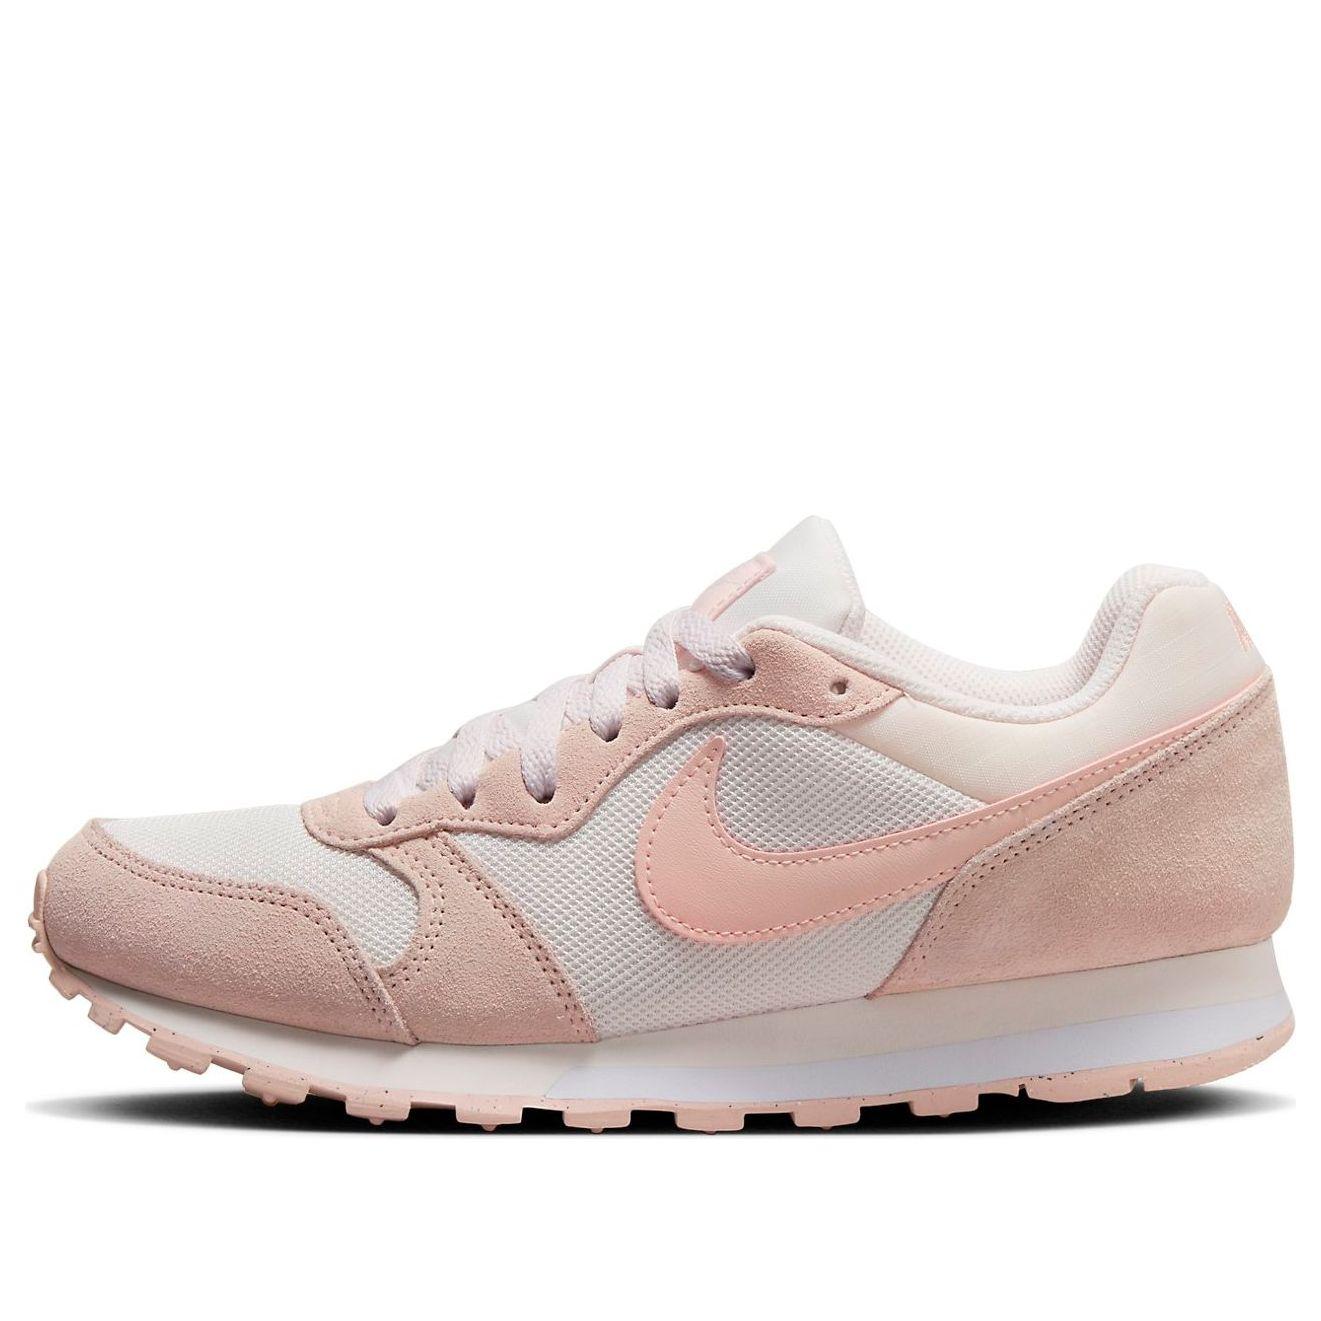 Nike Md Runner 2 in Pink | Lyst